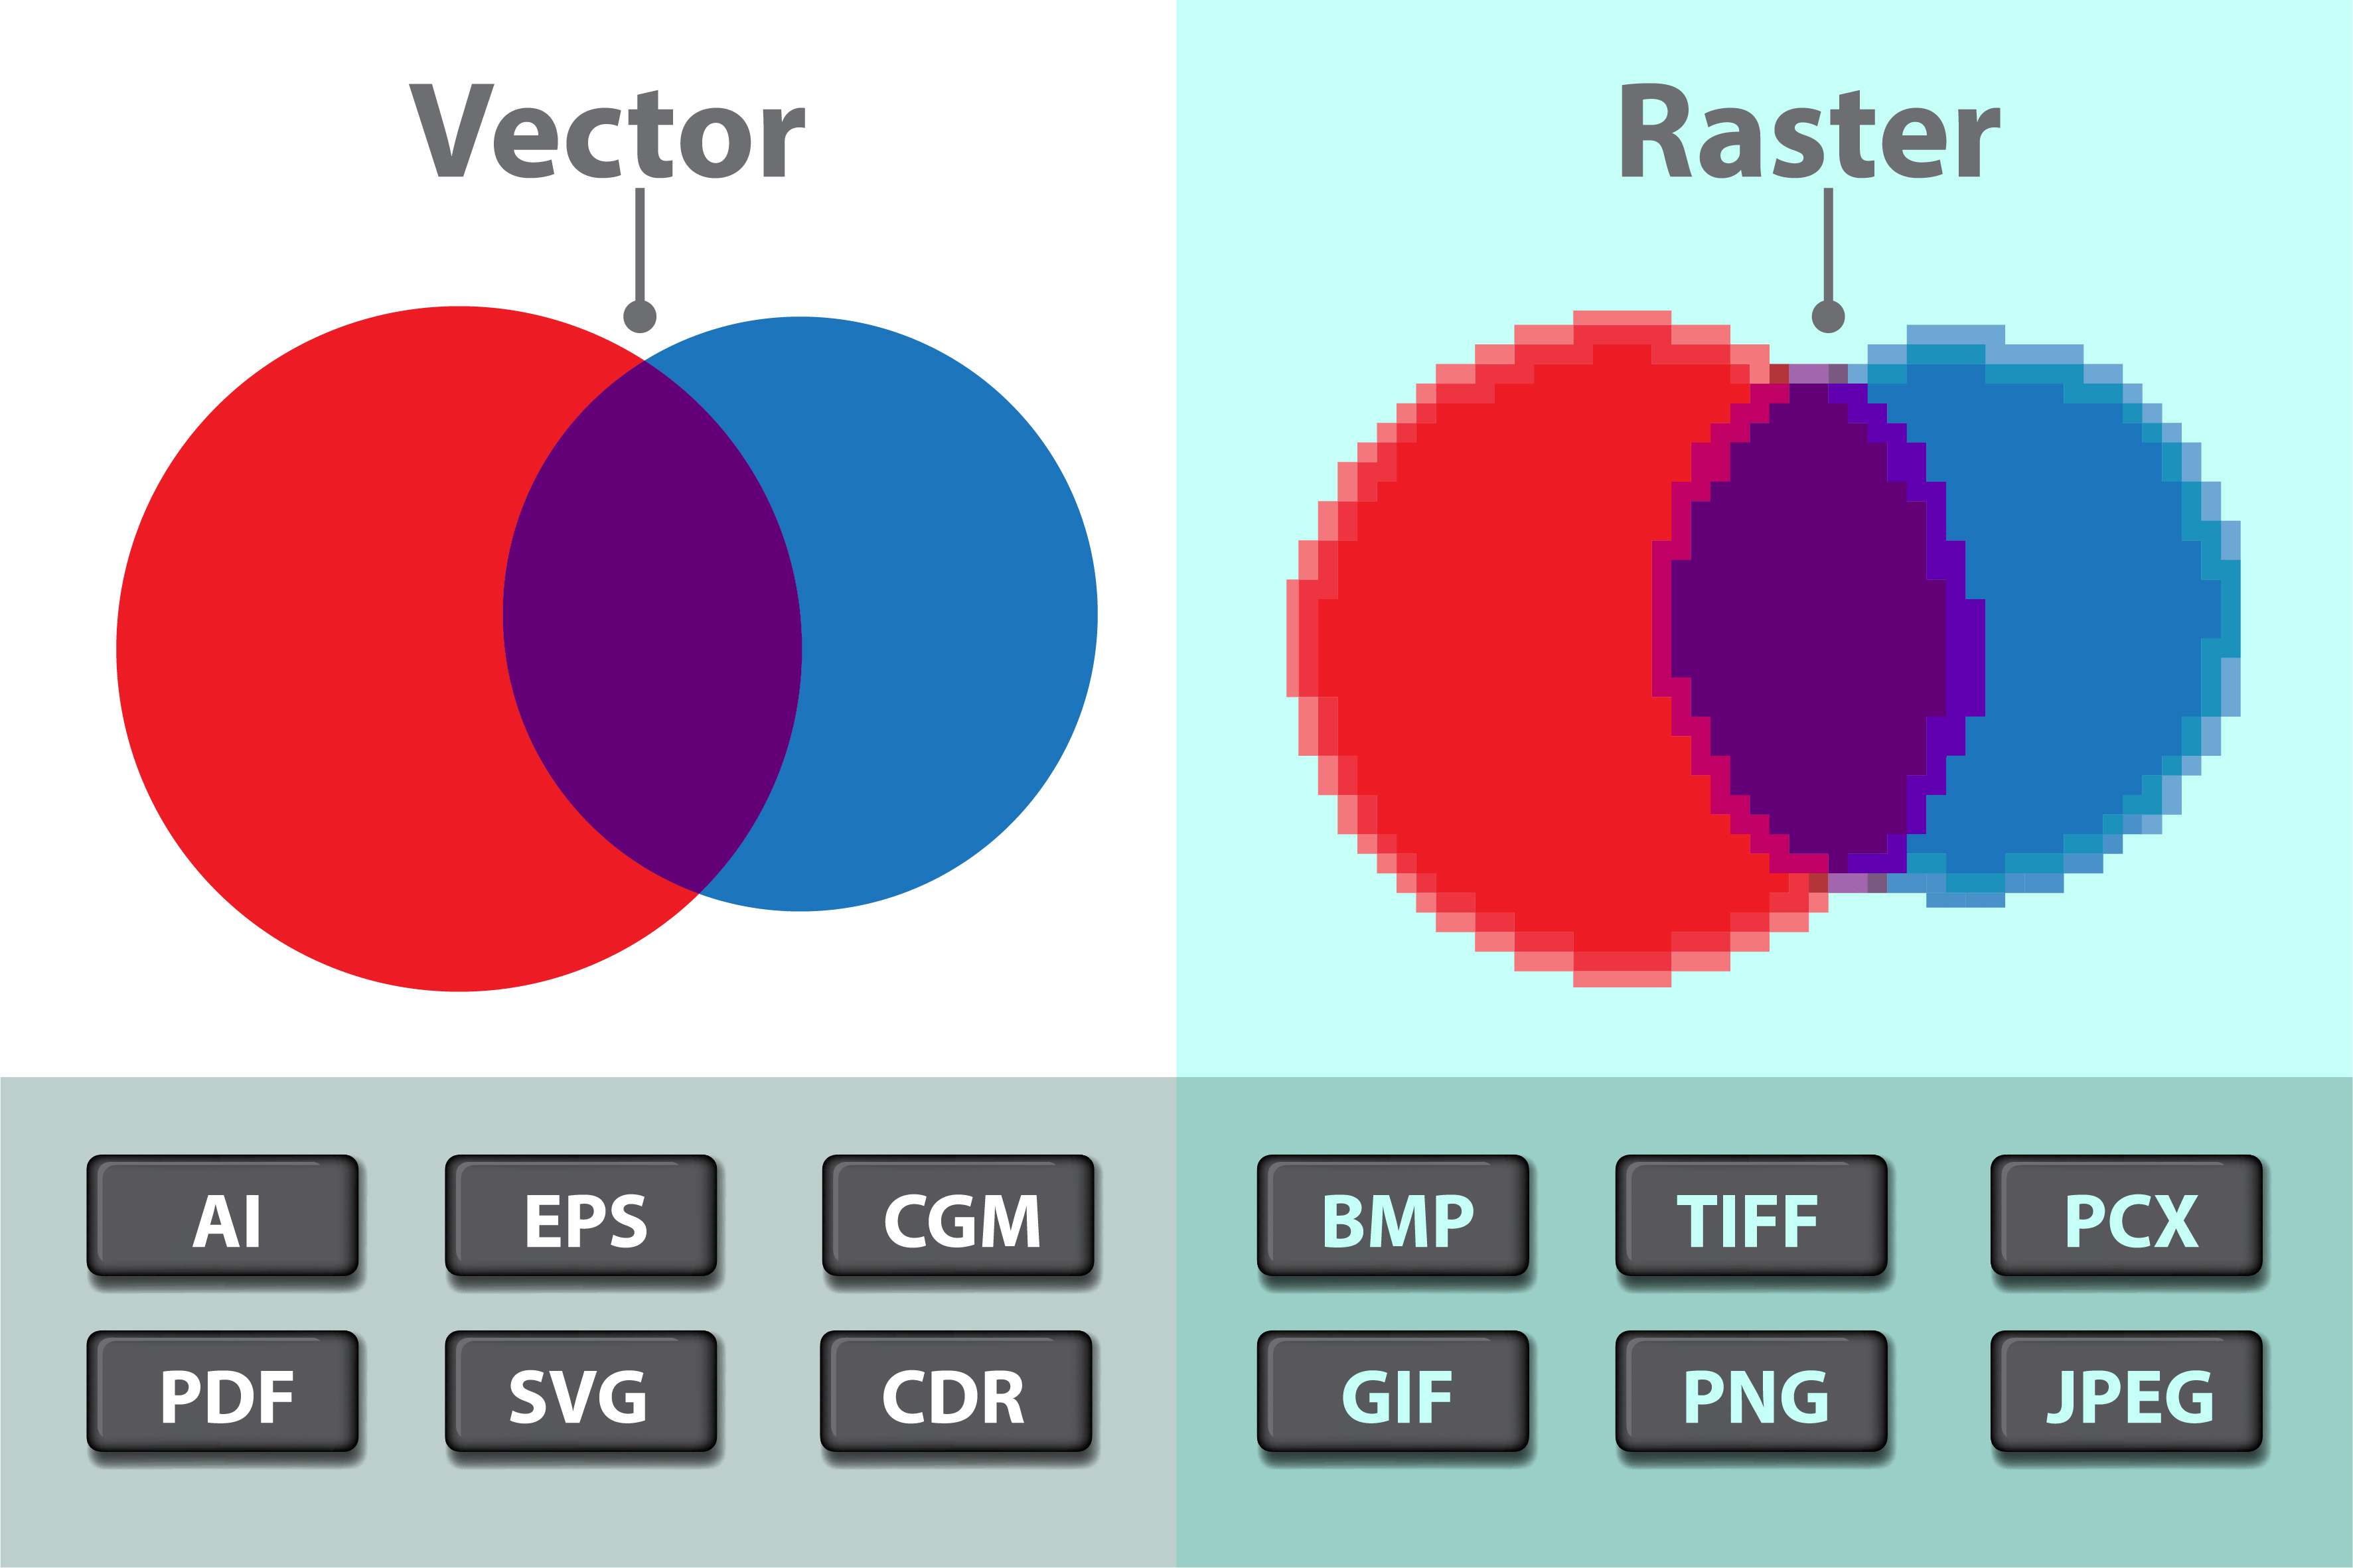 The different standard raster and vector file formats